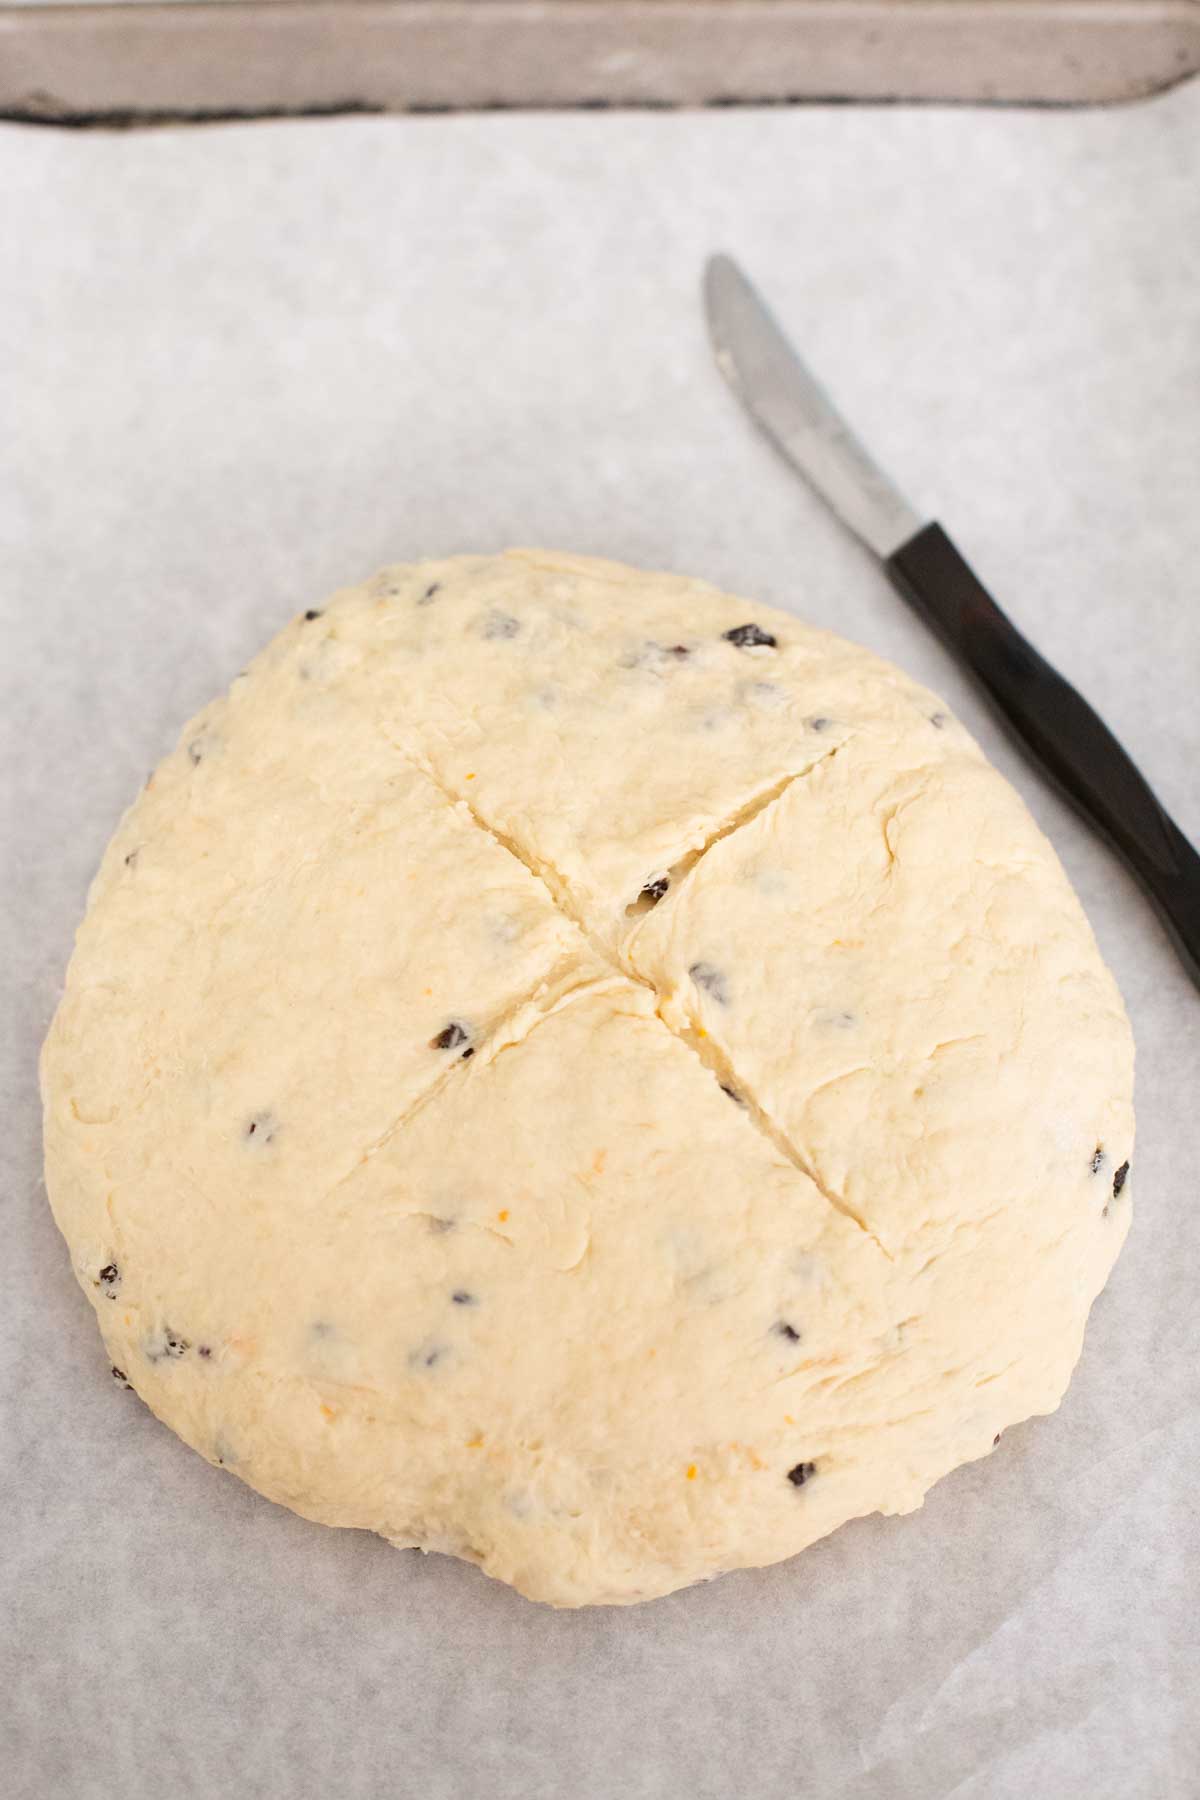 The dough has been shaped into a round disk and a cross has been sliced on the top with a small knife that sits on the tray next to it.